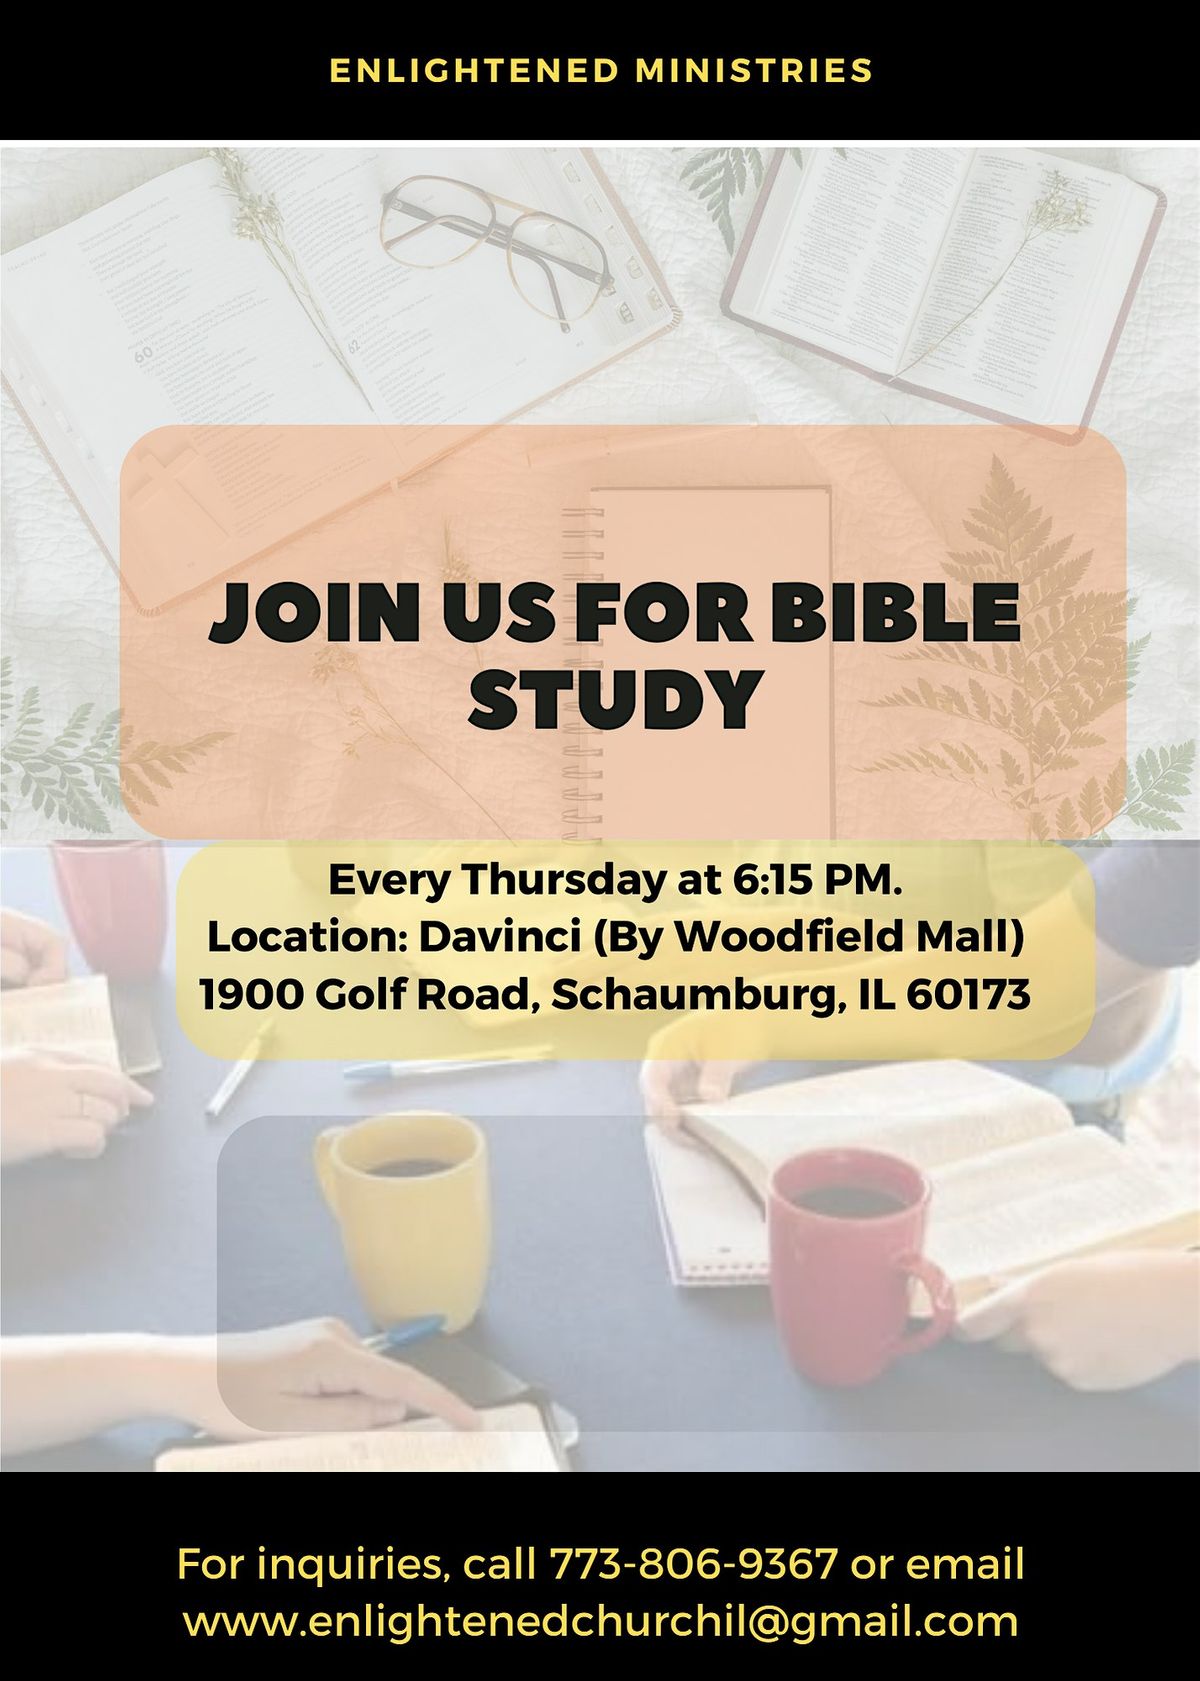 Bible Study: Enlightened Ministries